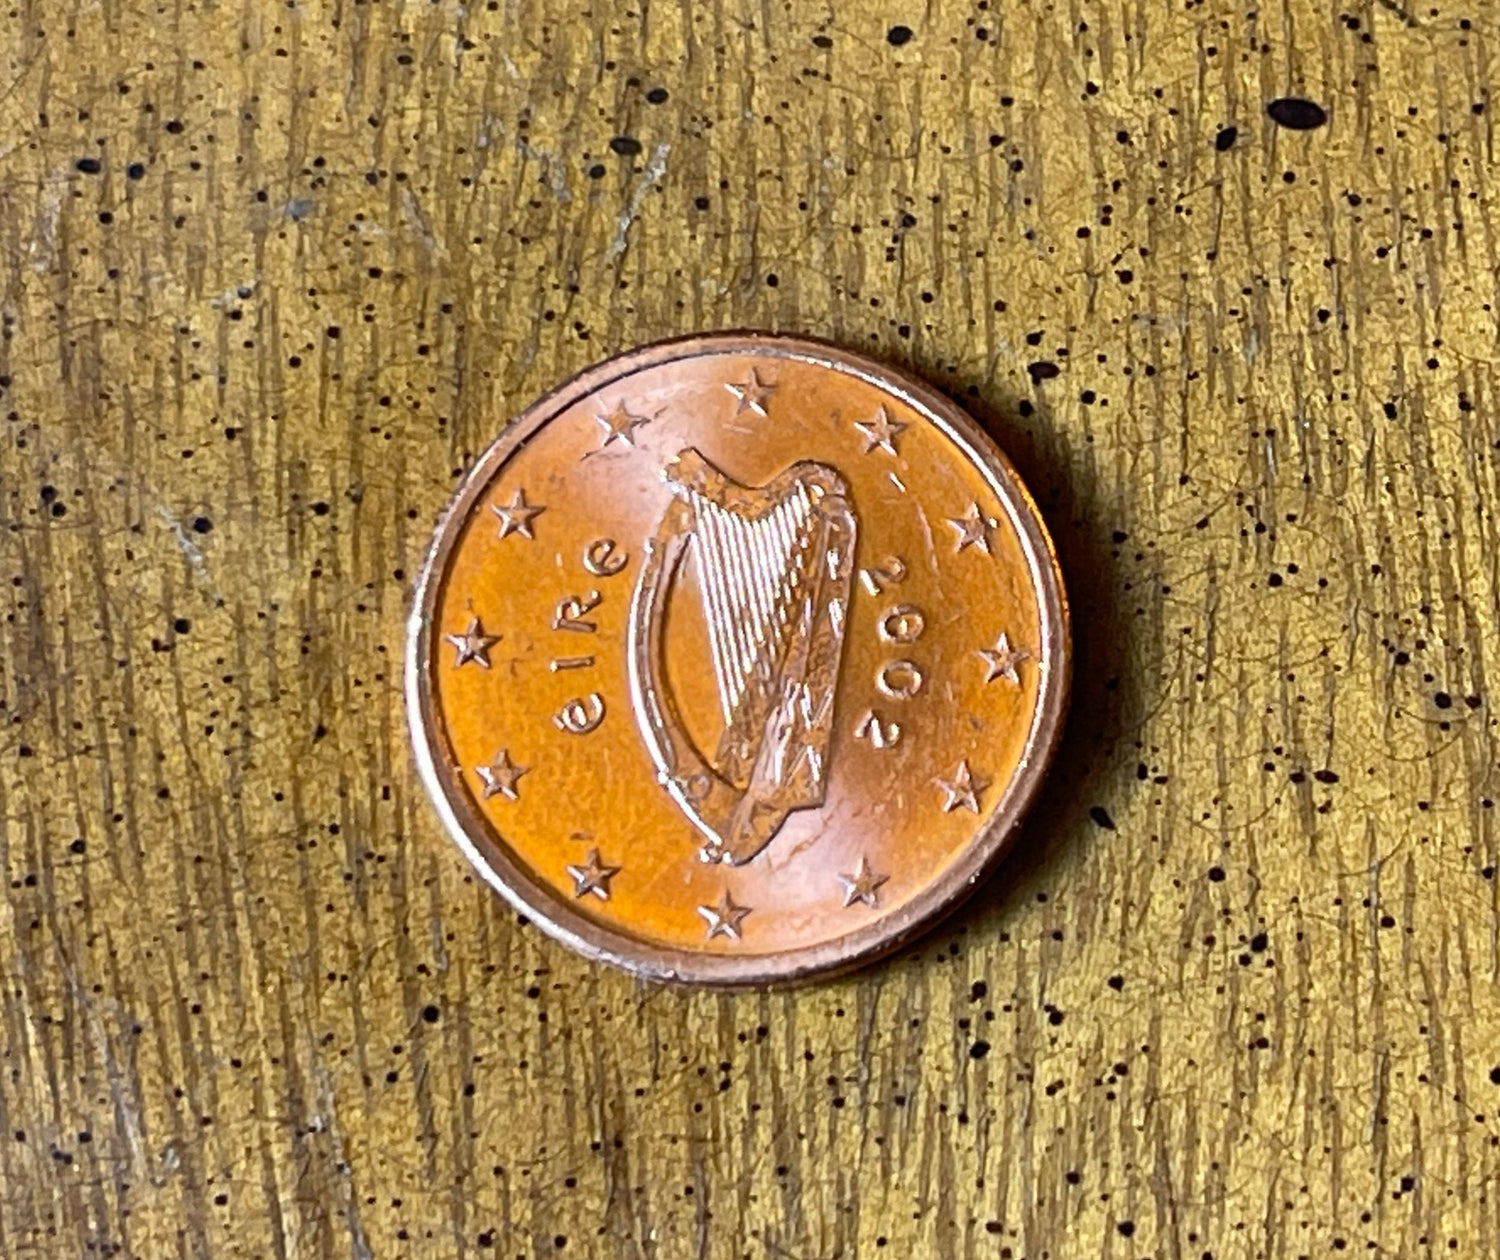 Irish Harp 2 Euro Cents Ireland Authentic Coin Money for Jewelry and Craft Making